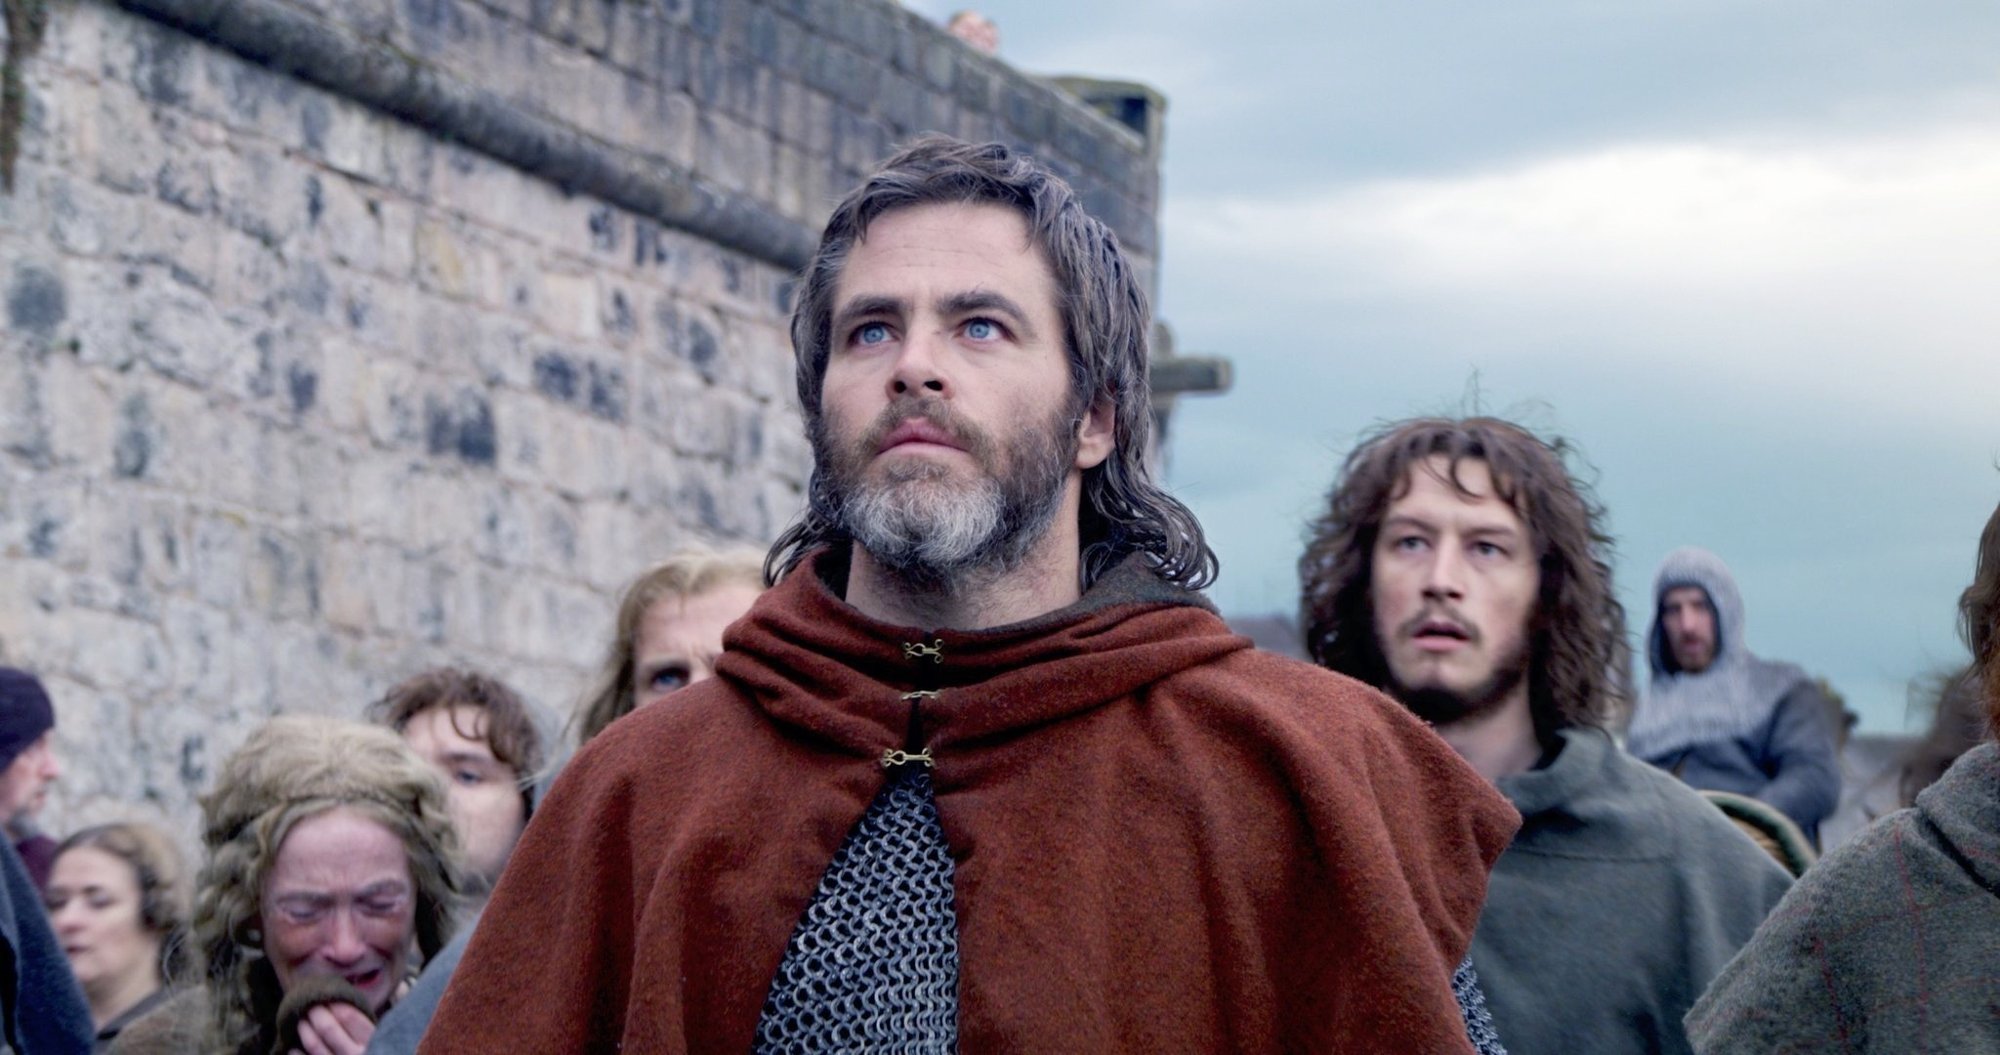 Chris Pine stars as Robert The Bruce in Netflix's Outlaw King (2018)